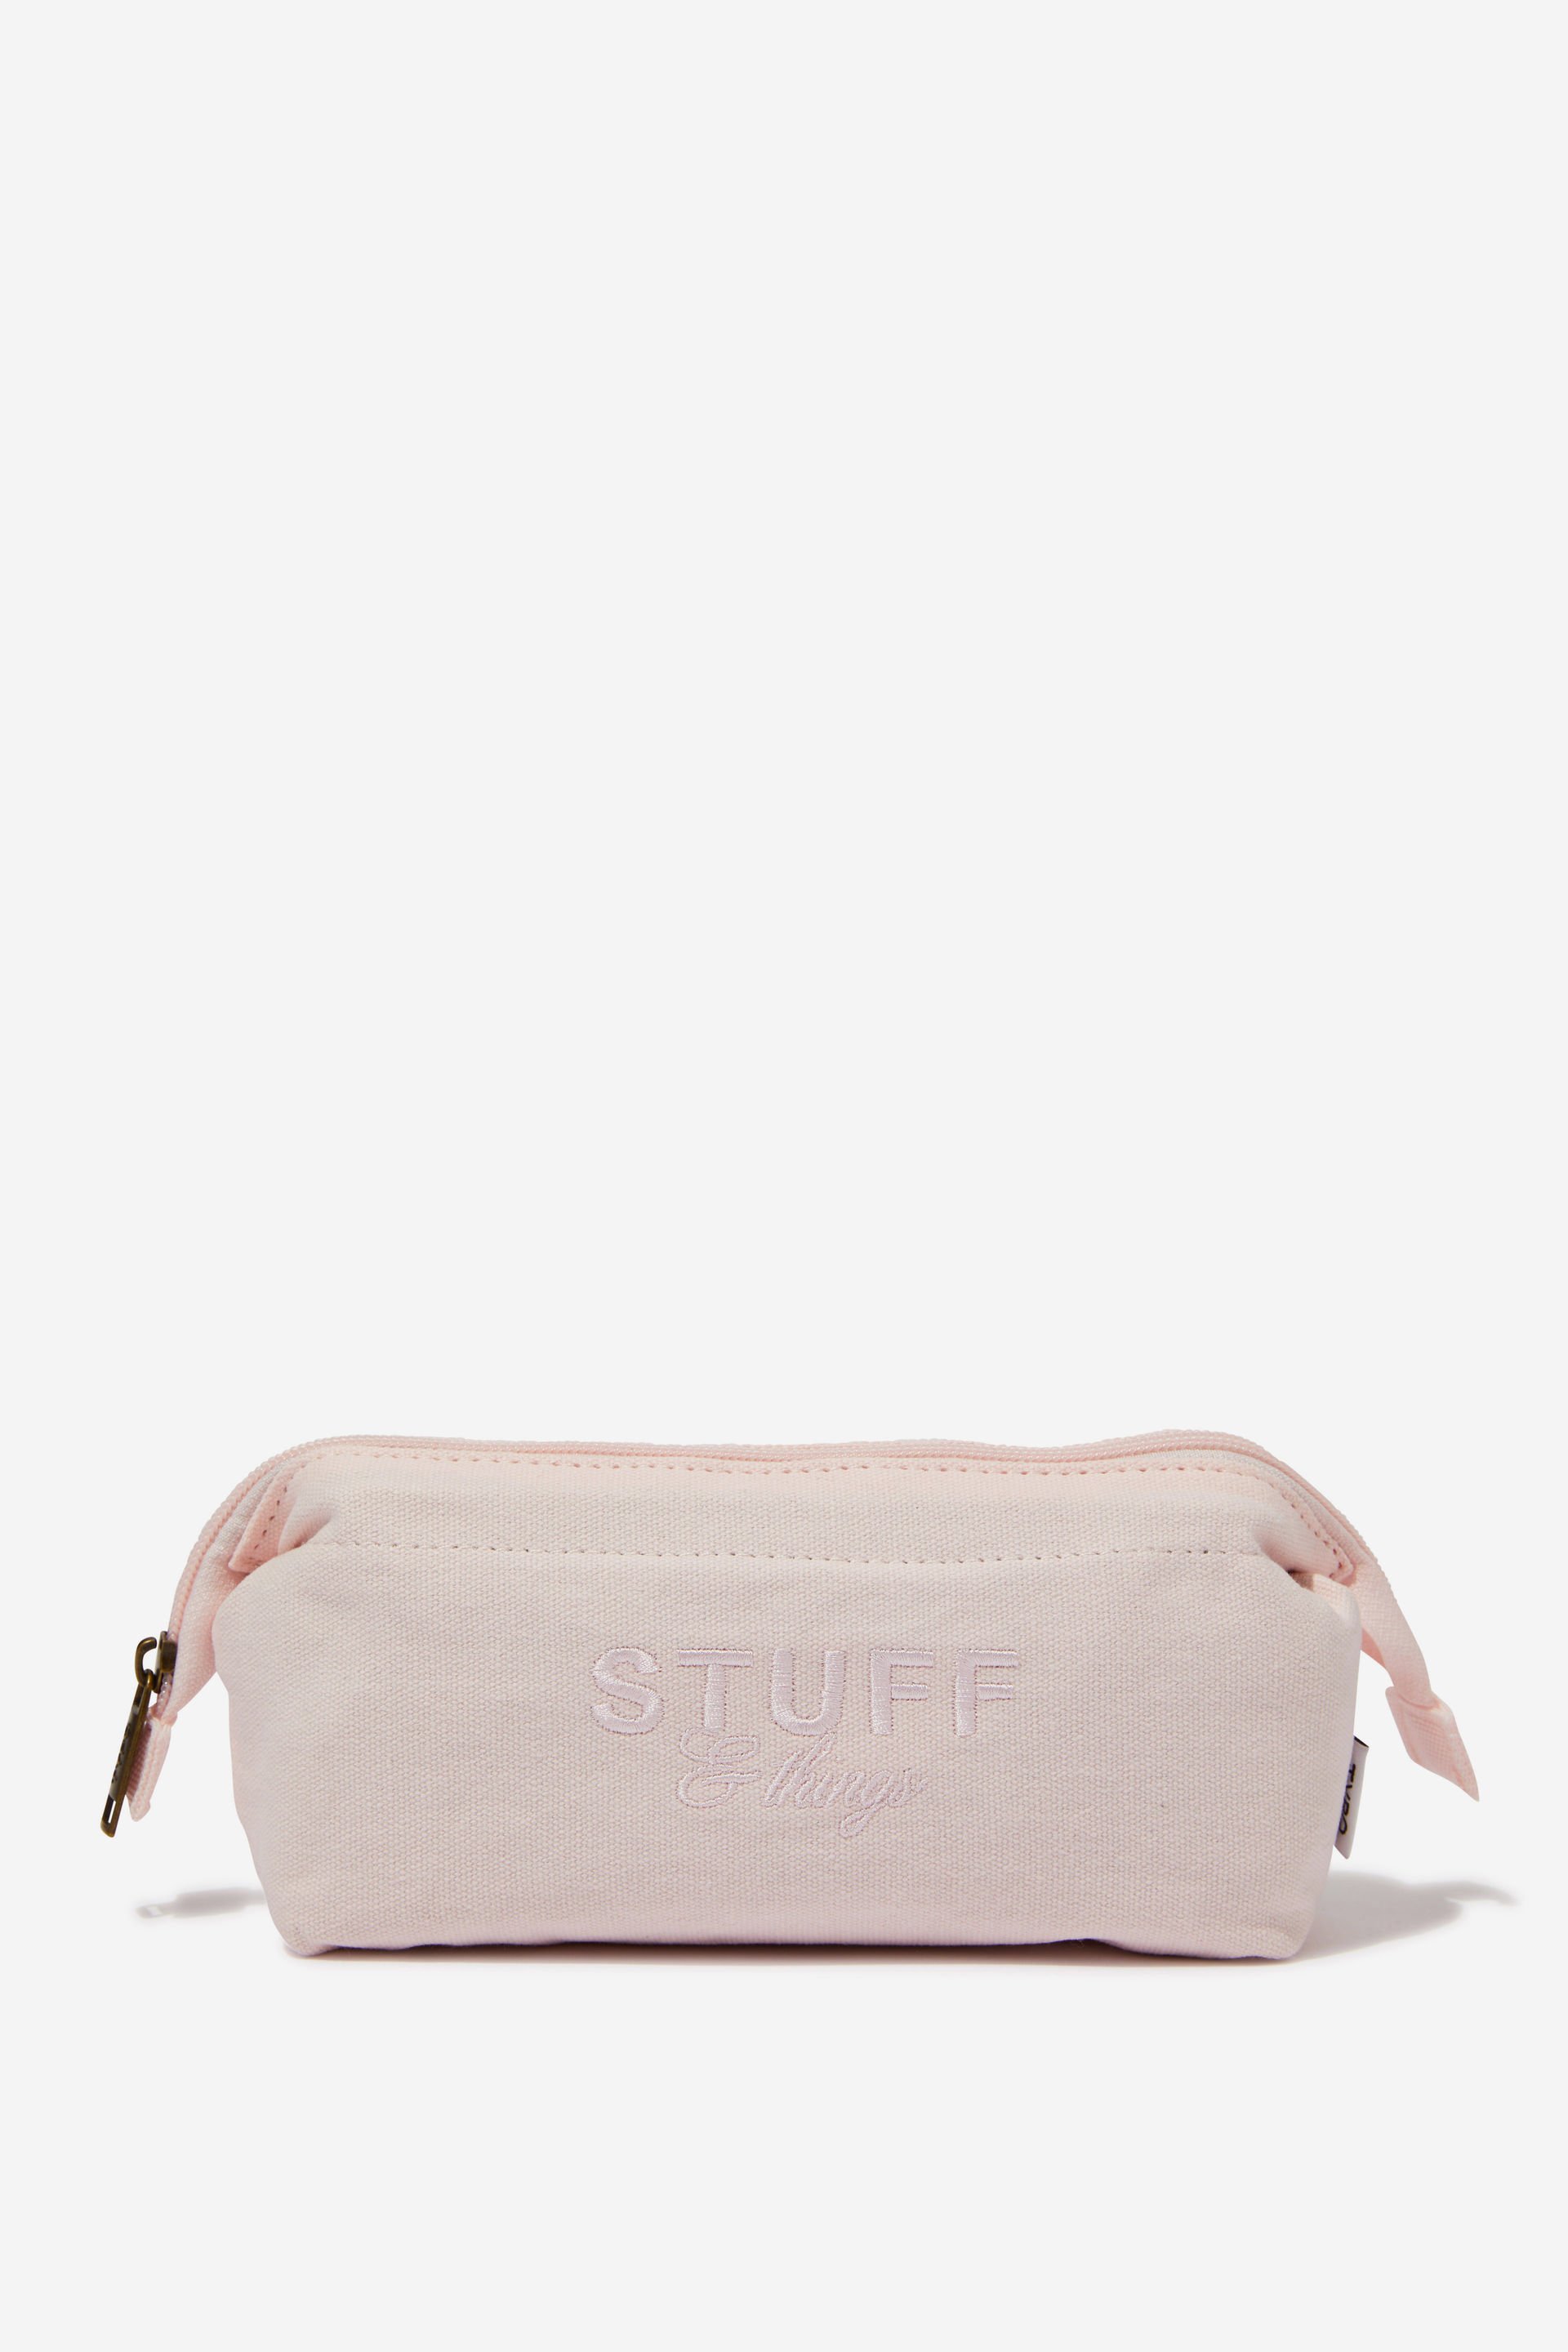 Typo - Billie Canvas Pencil Case - Stuff and things